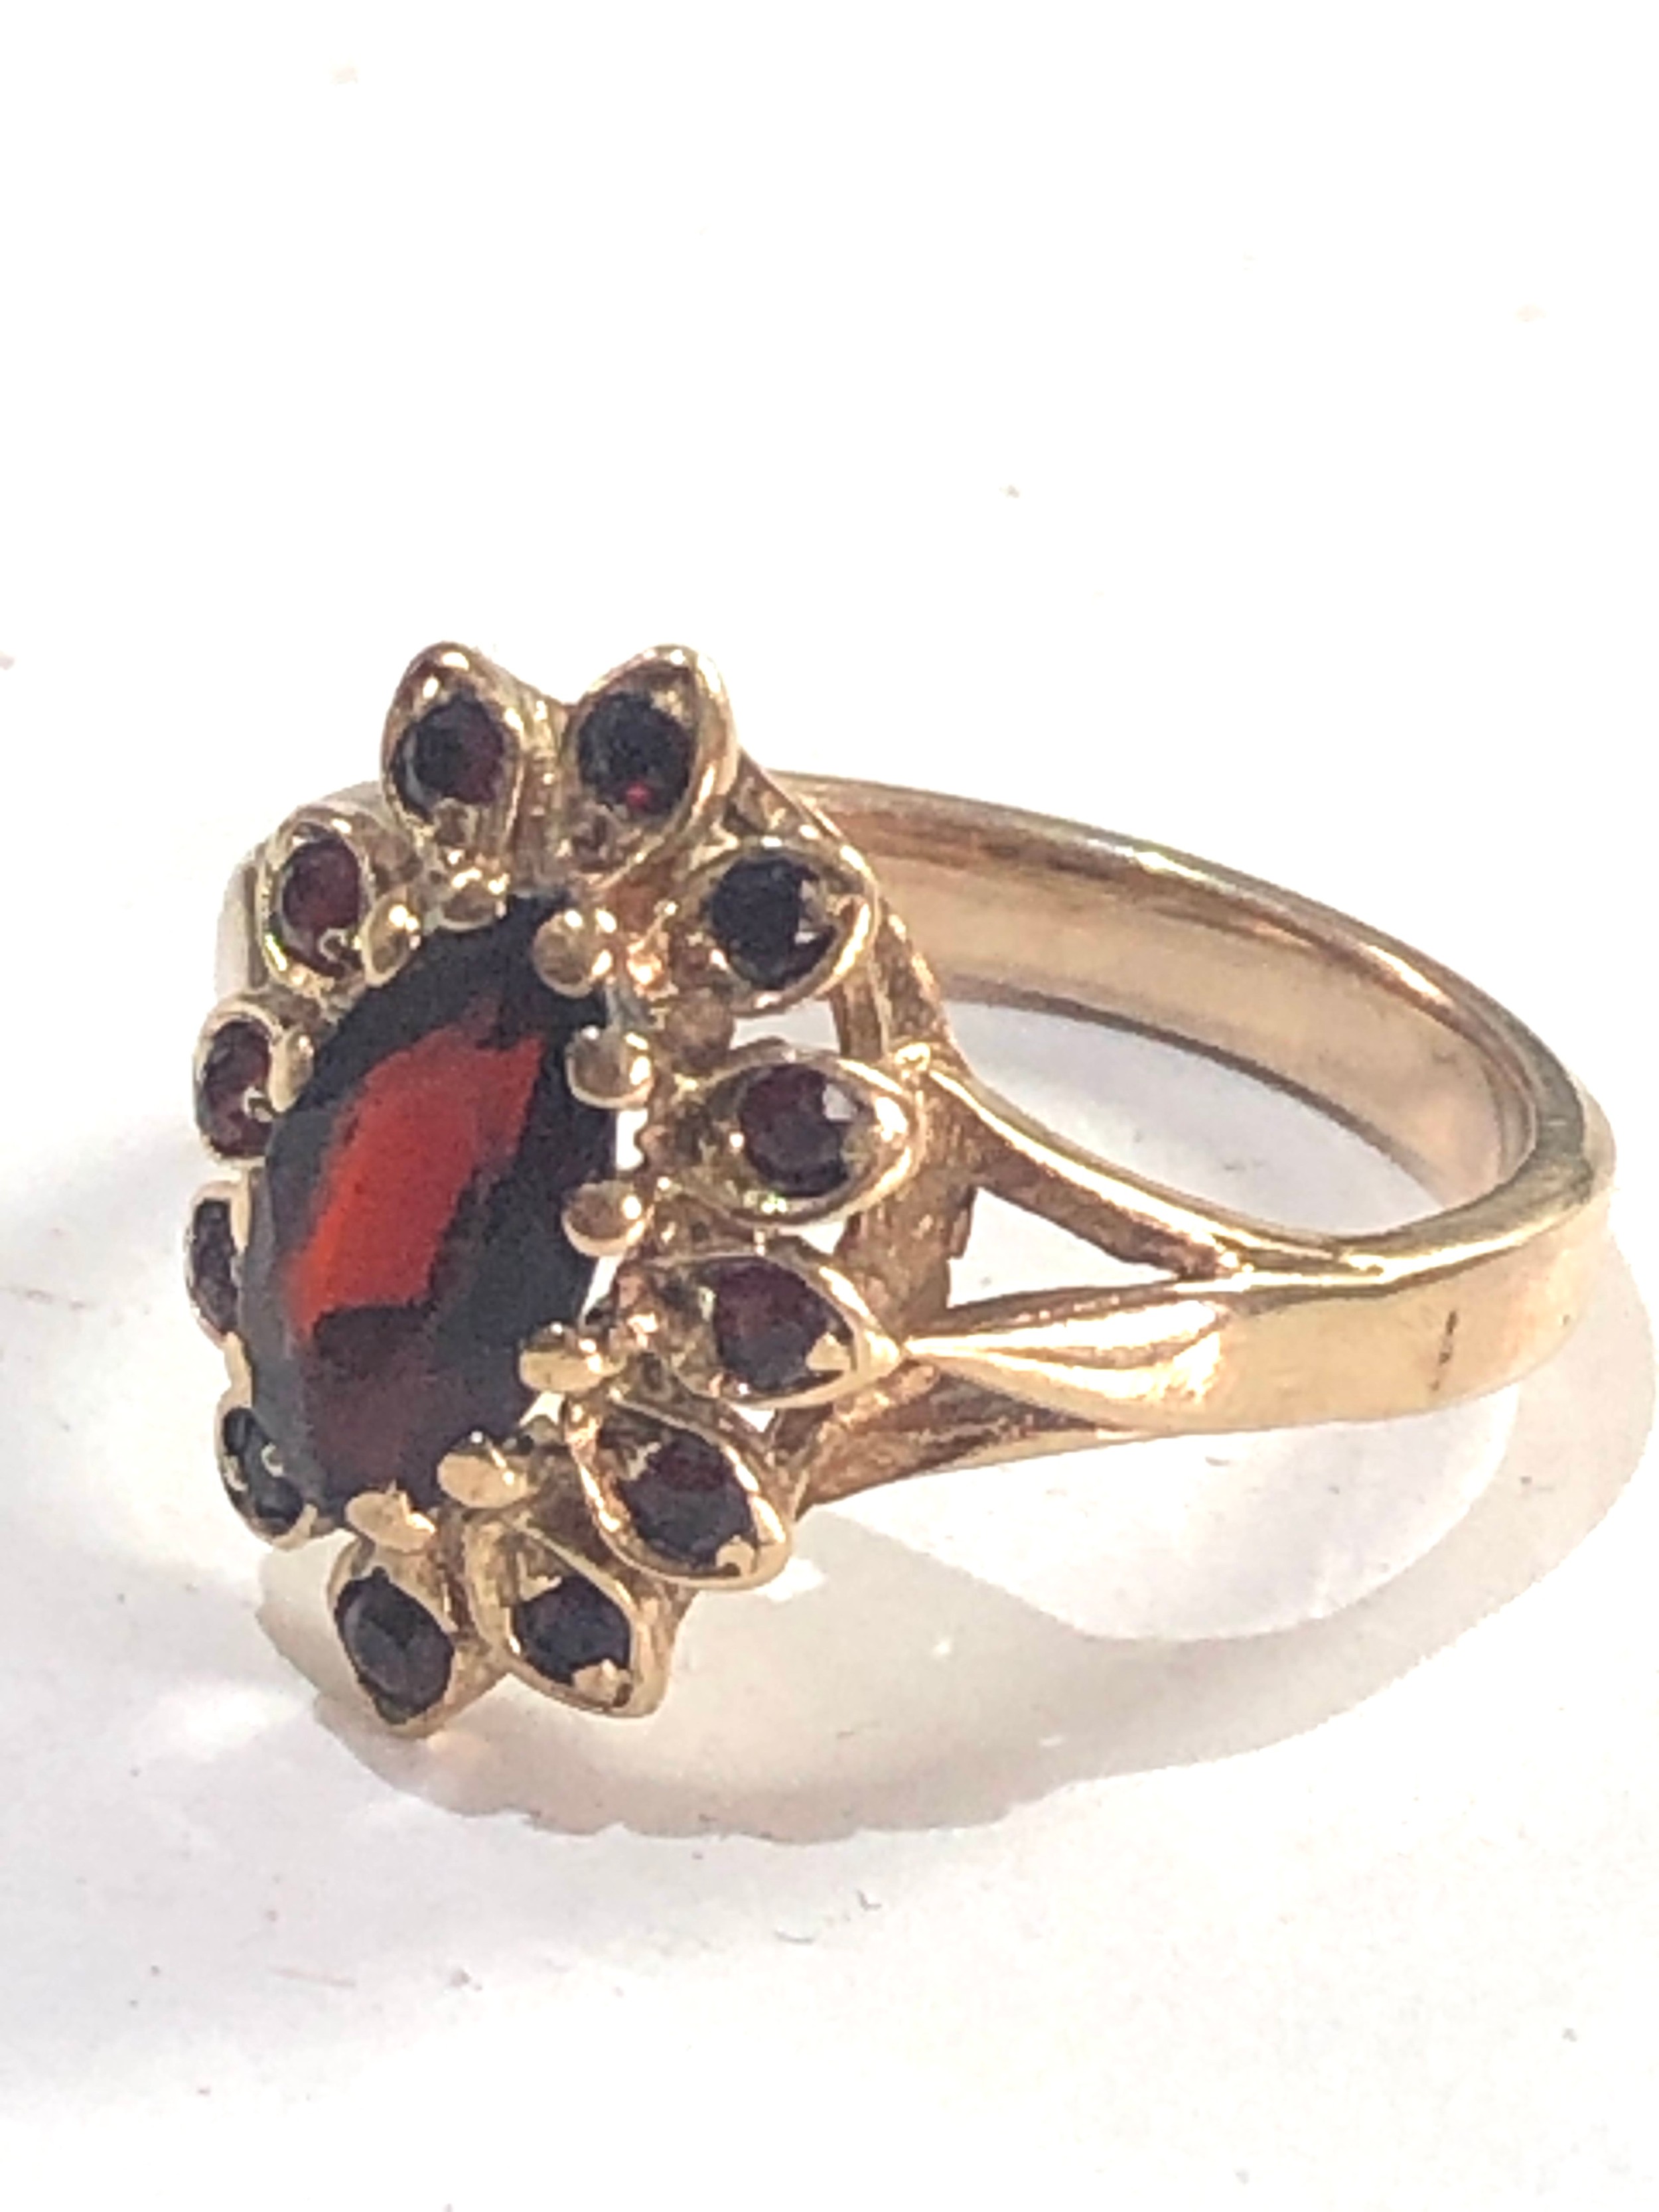 9ct gold garnet ring weight 3.5g chip and wear to garnets - Image 2 of 3